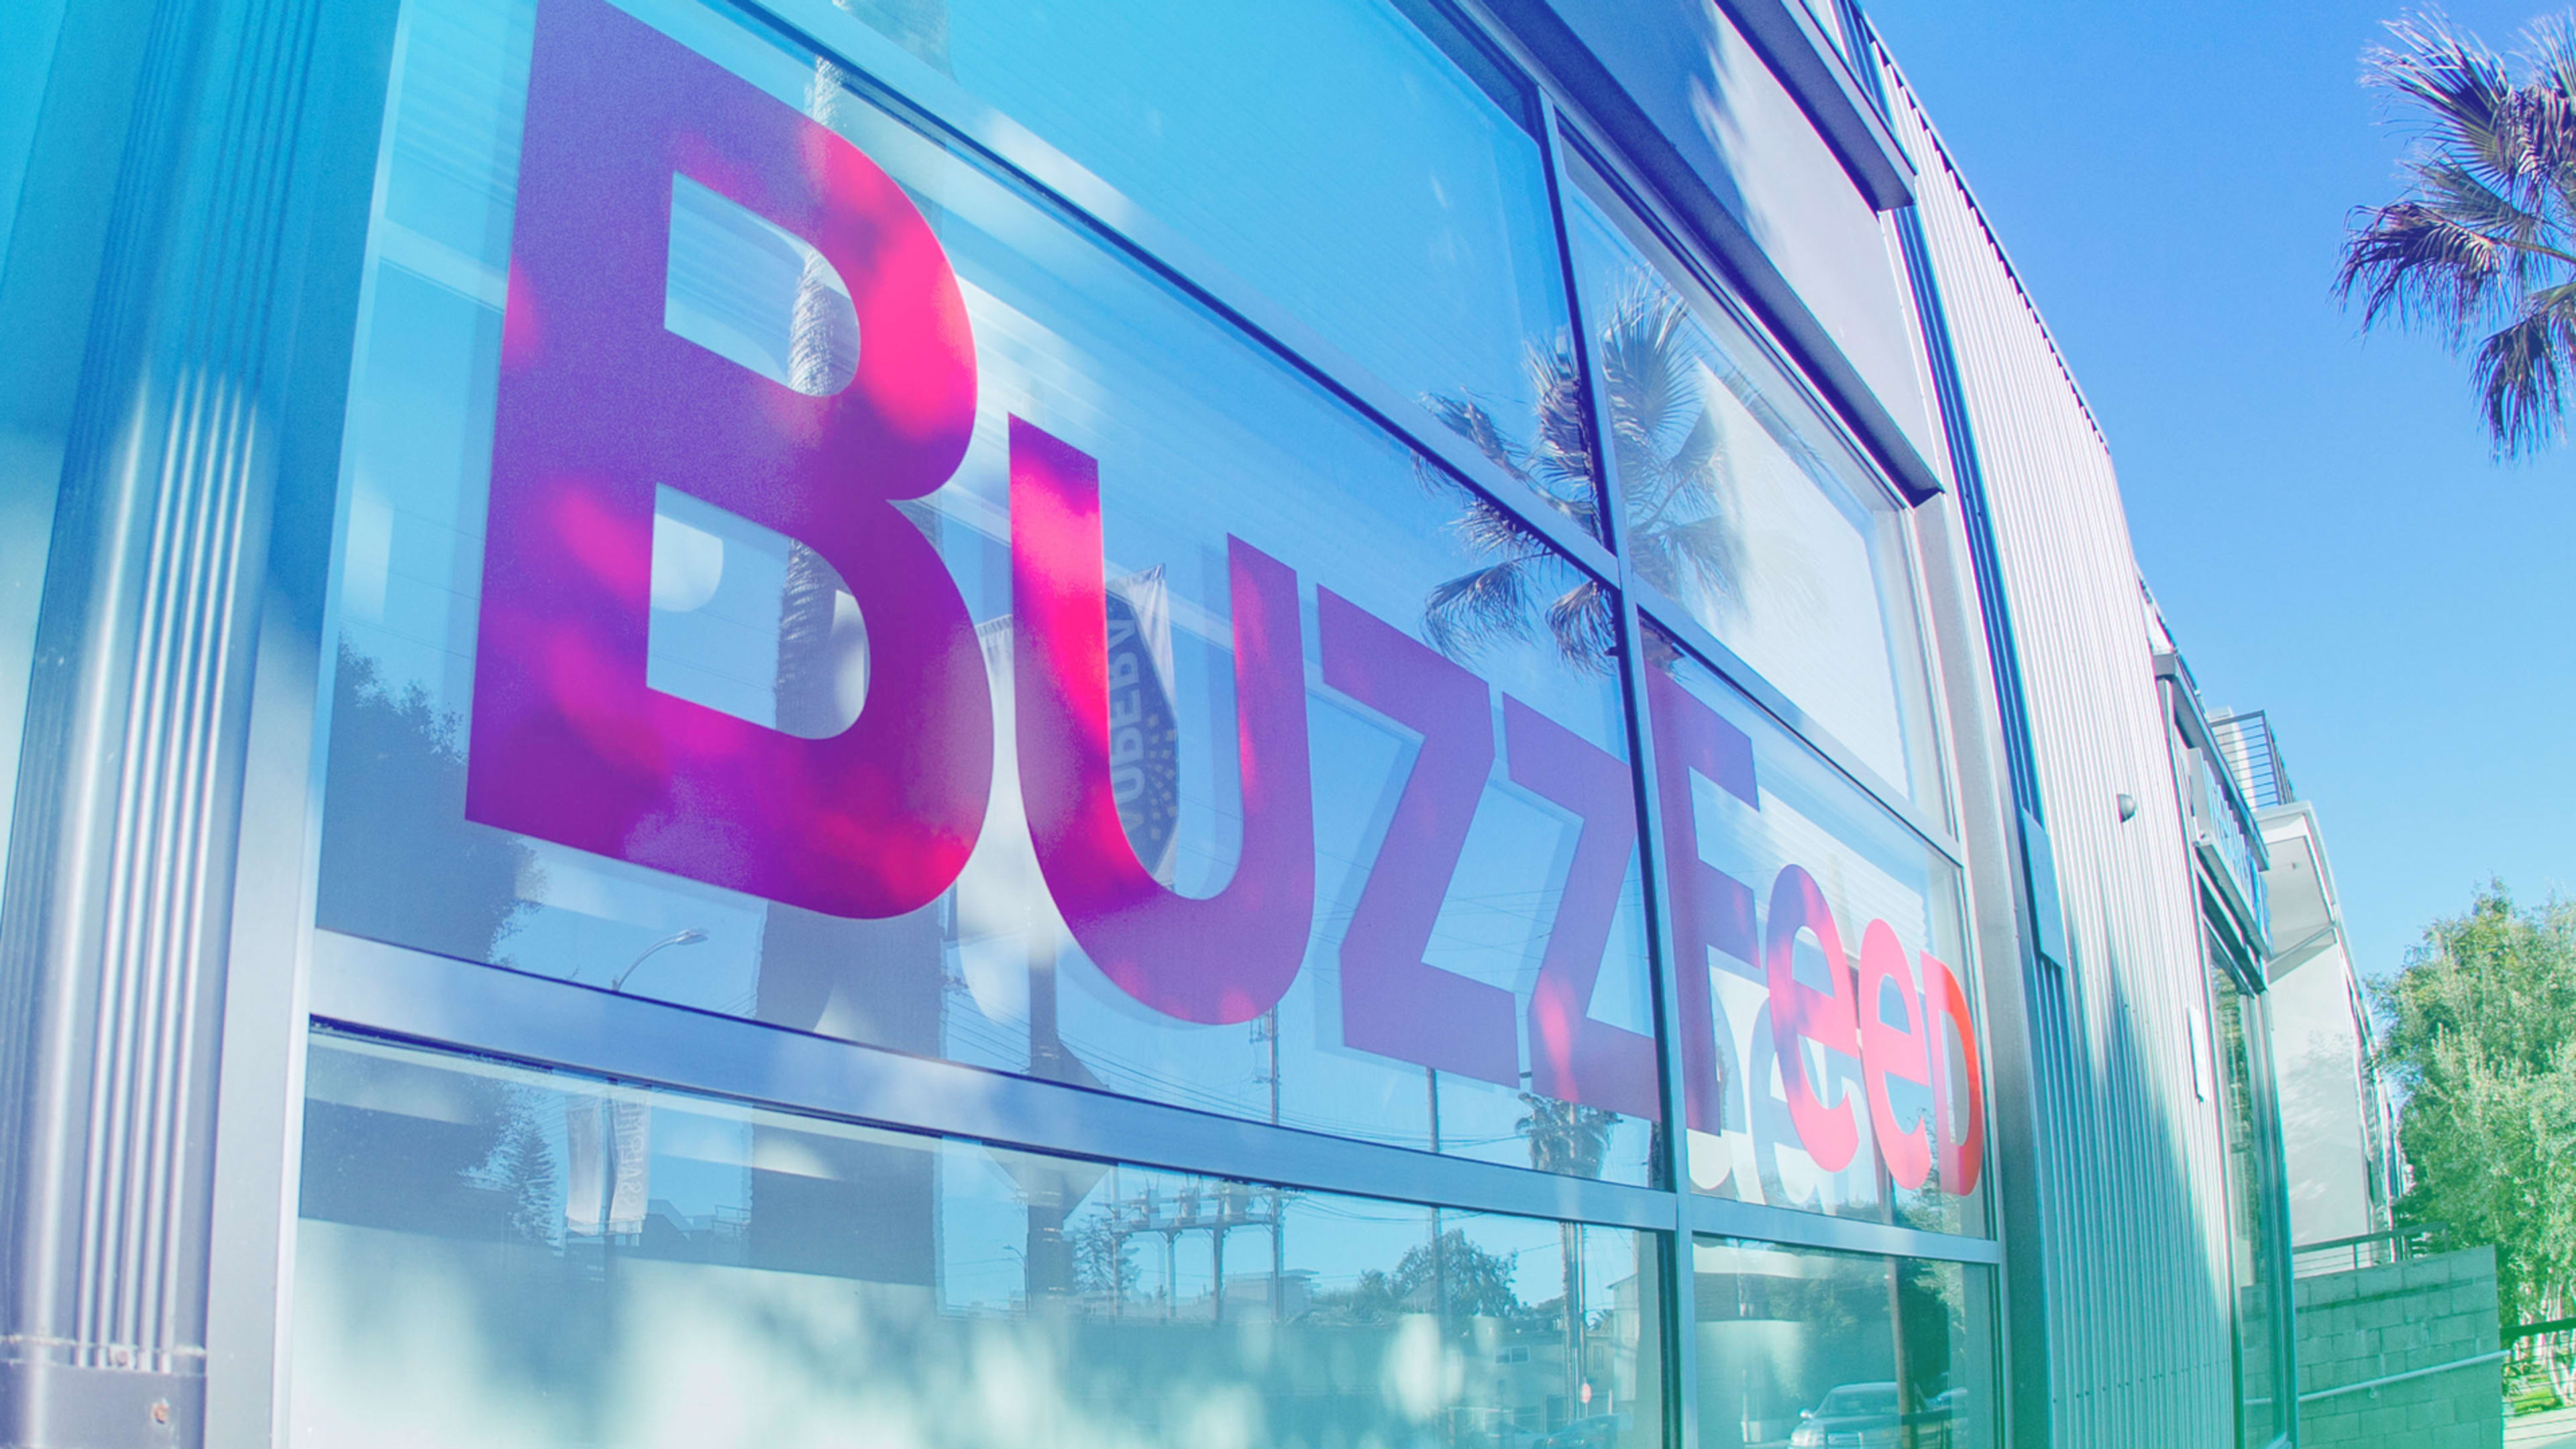 Can you spare a dime for BuzzFeed?